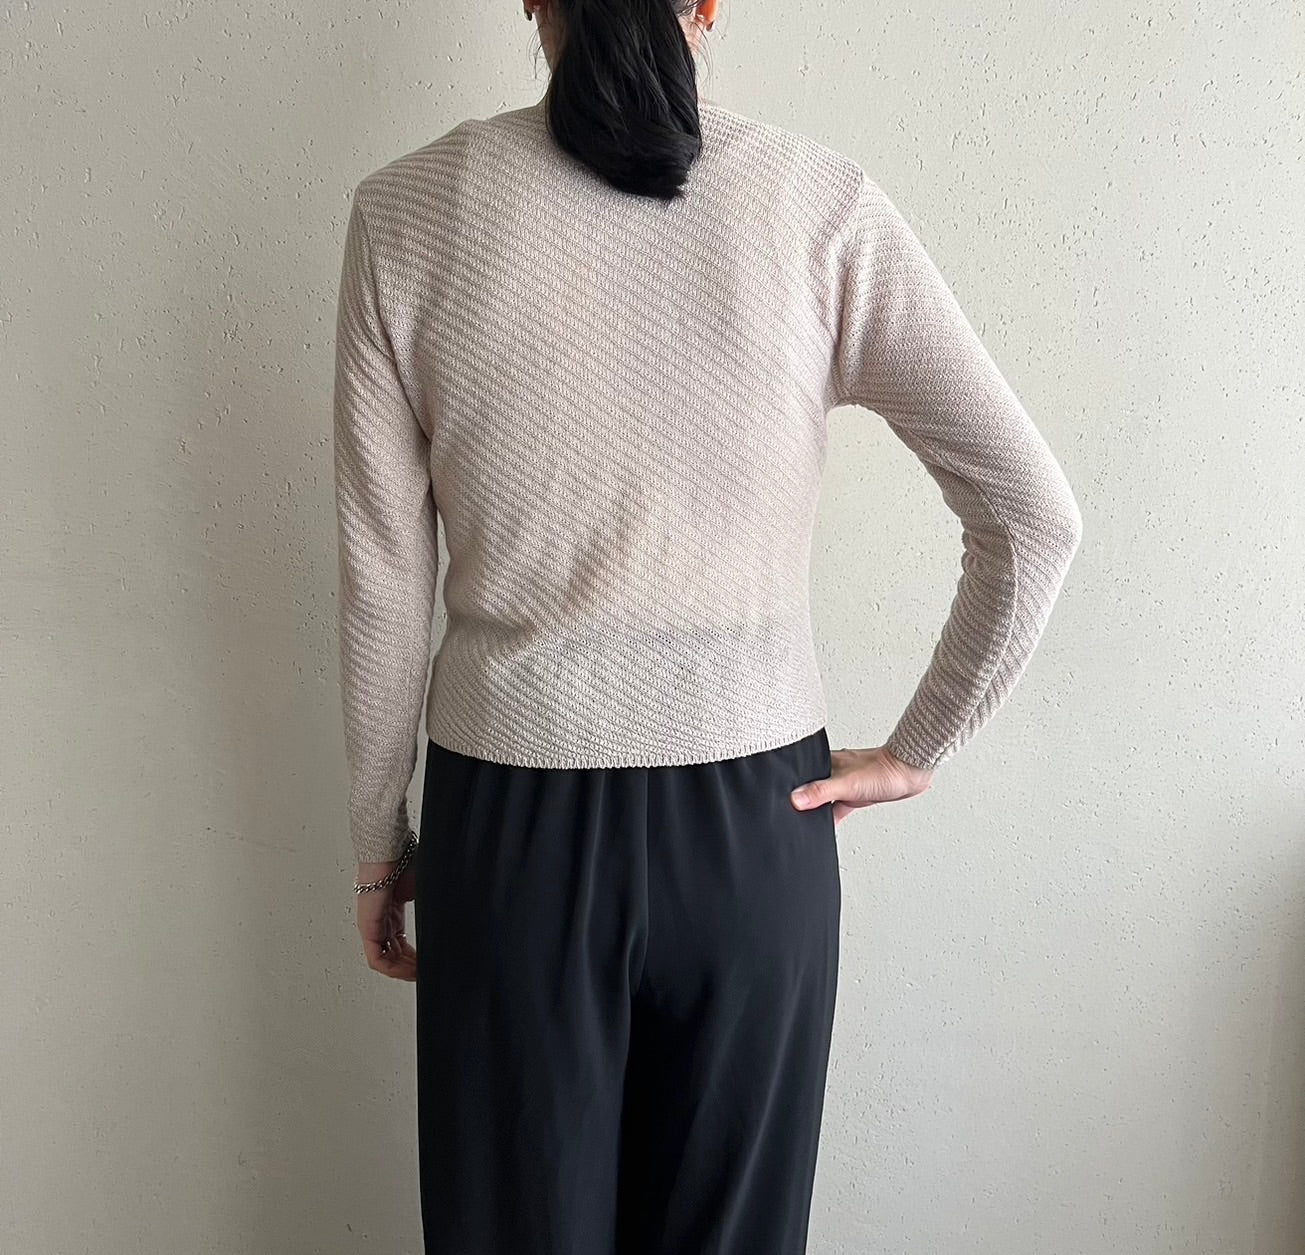 90s "J.CREW" Knit Cardigan Made in USA